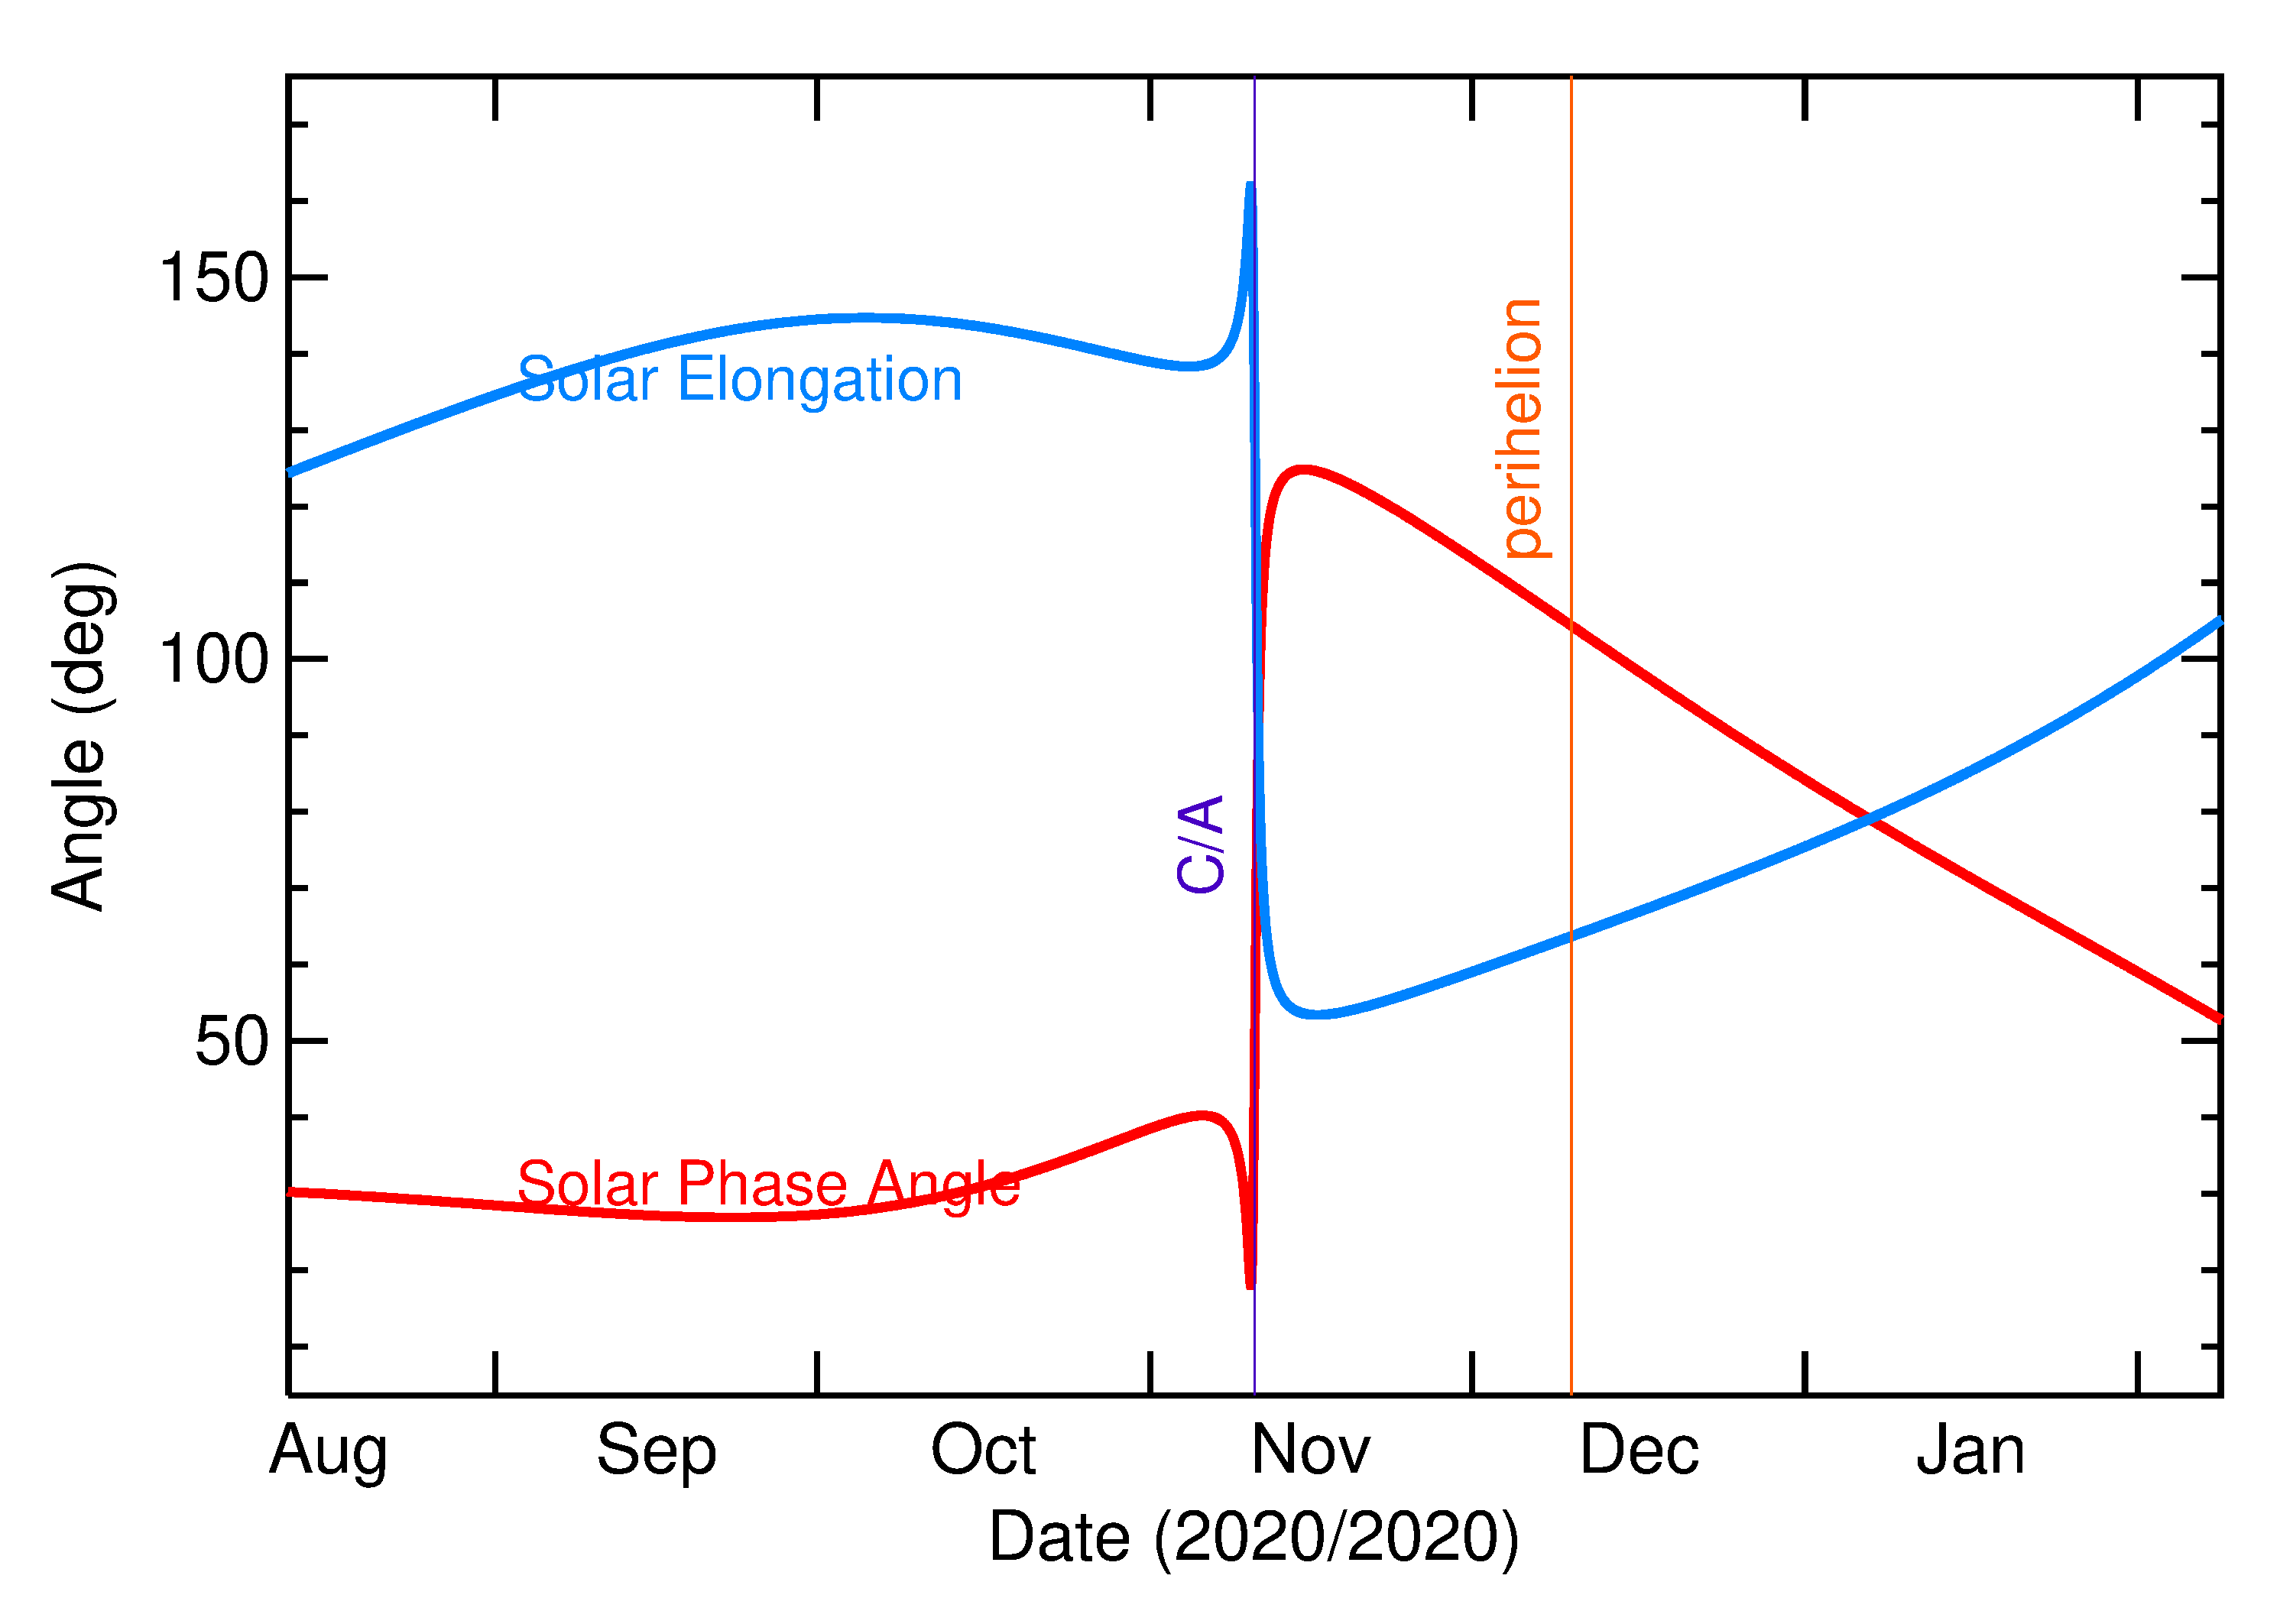 Solar Elongation and Solar Phase Angle of 2020 VR1 in the months around closest approach